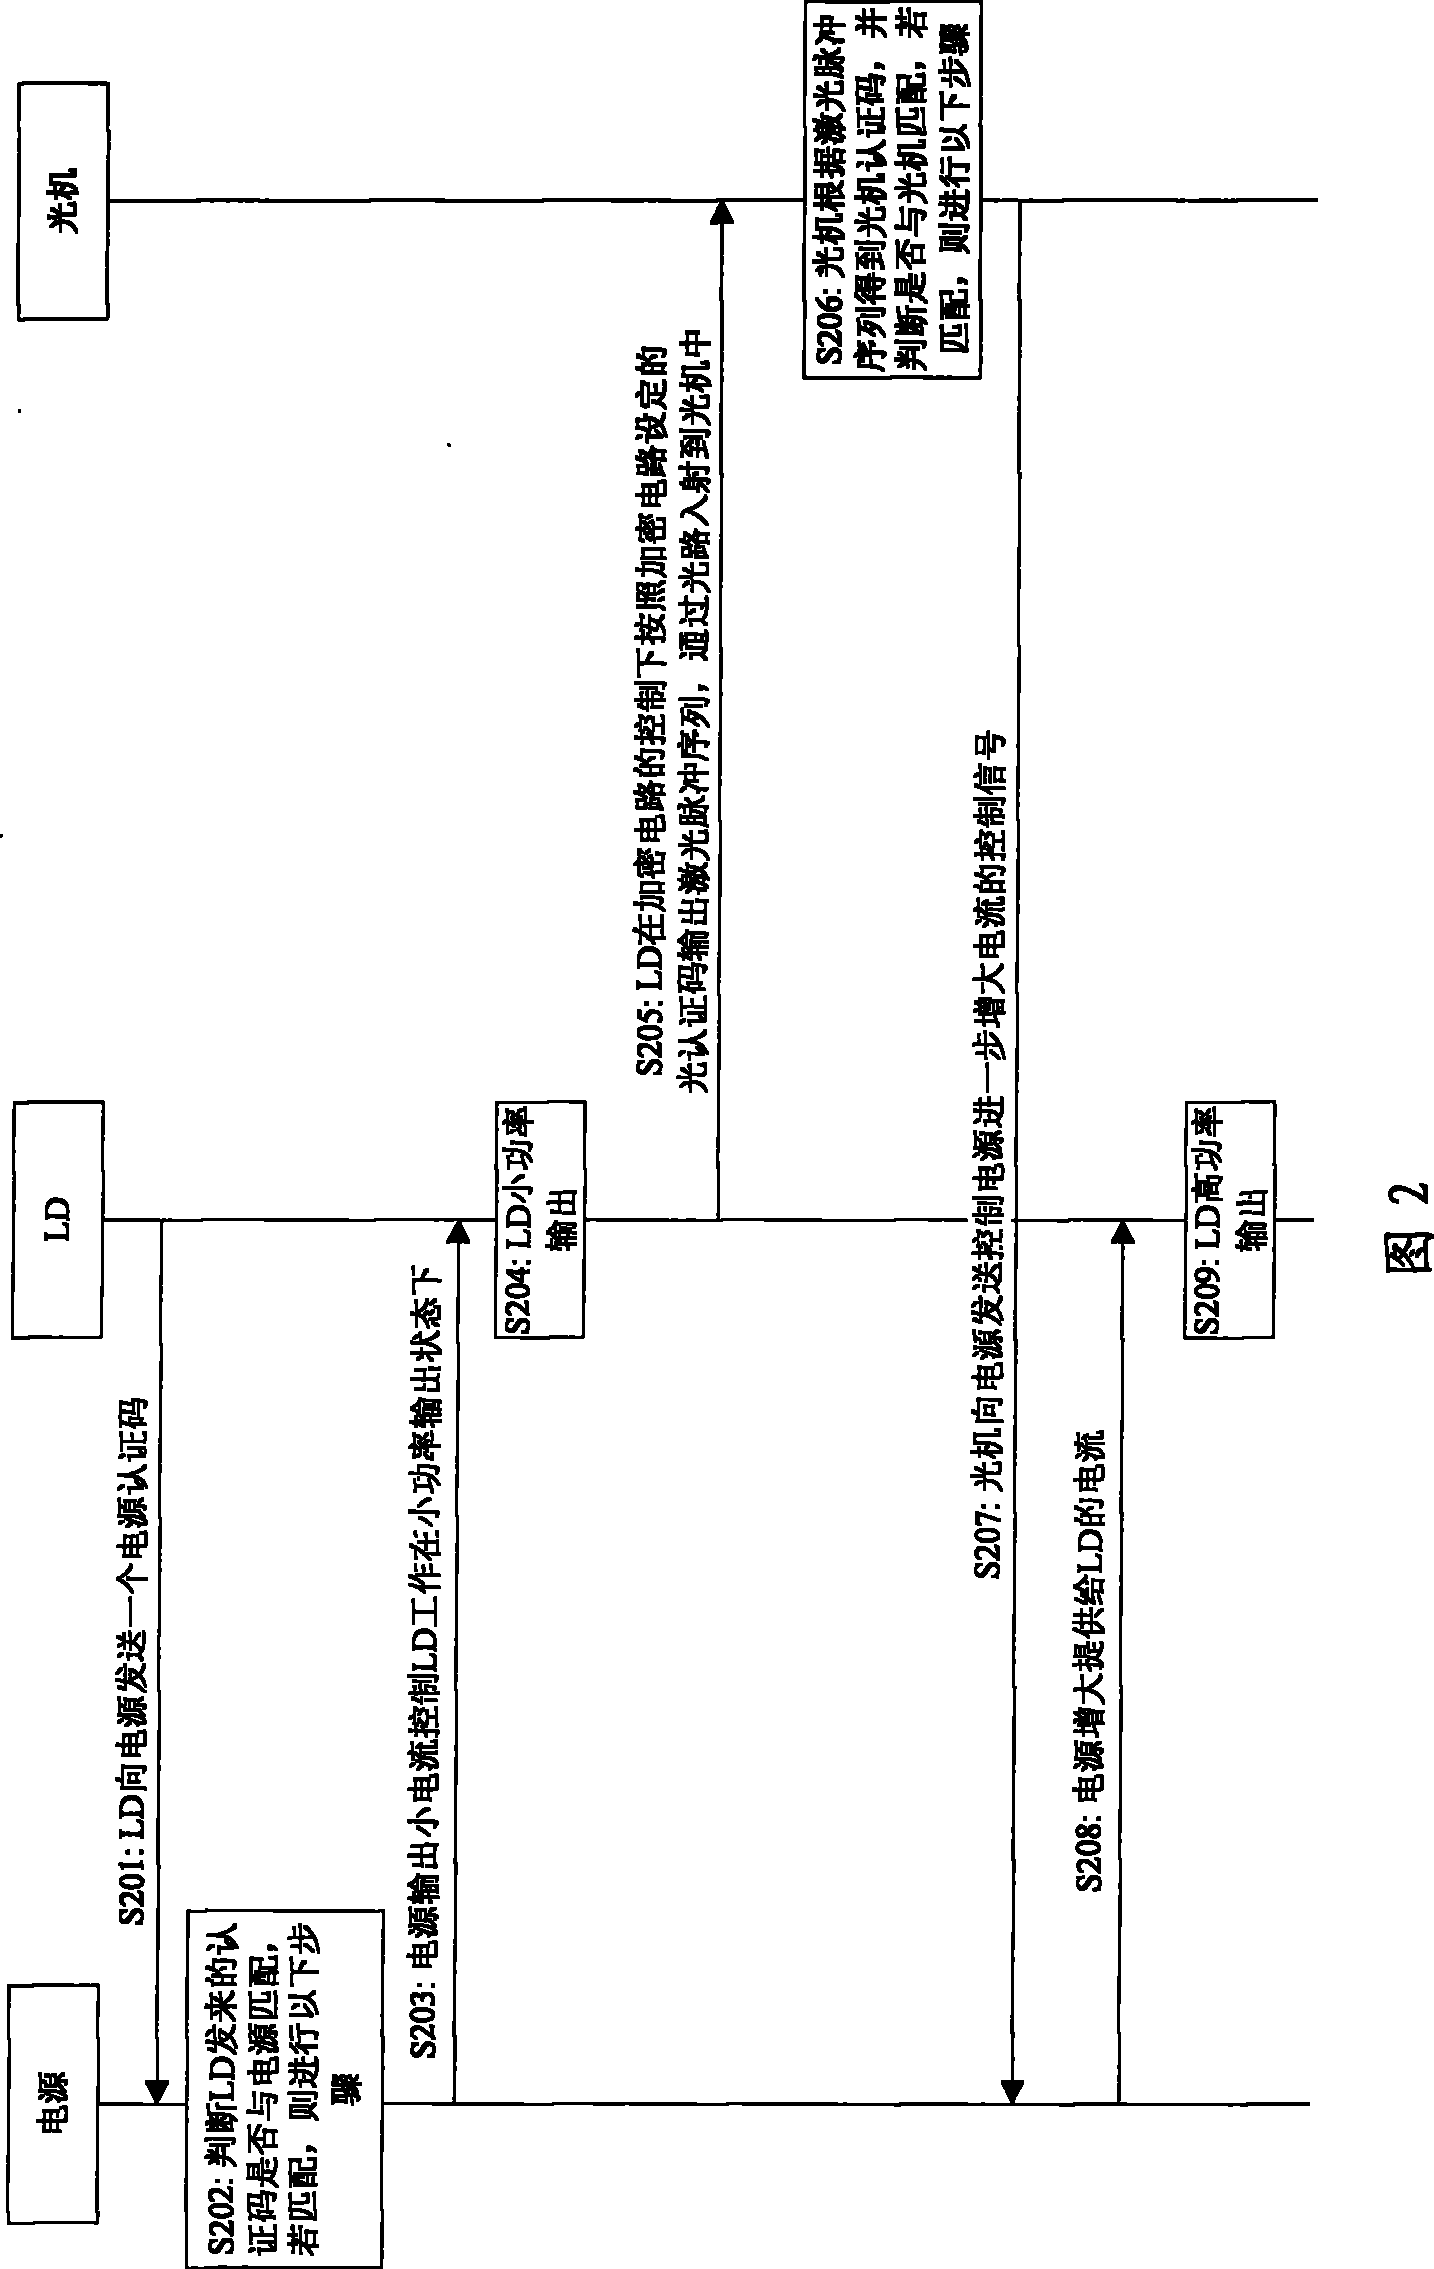 Equipment and method for controlling laser light transmission